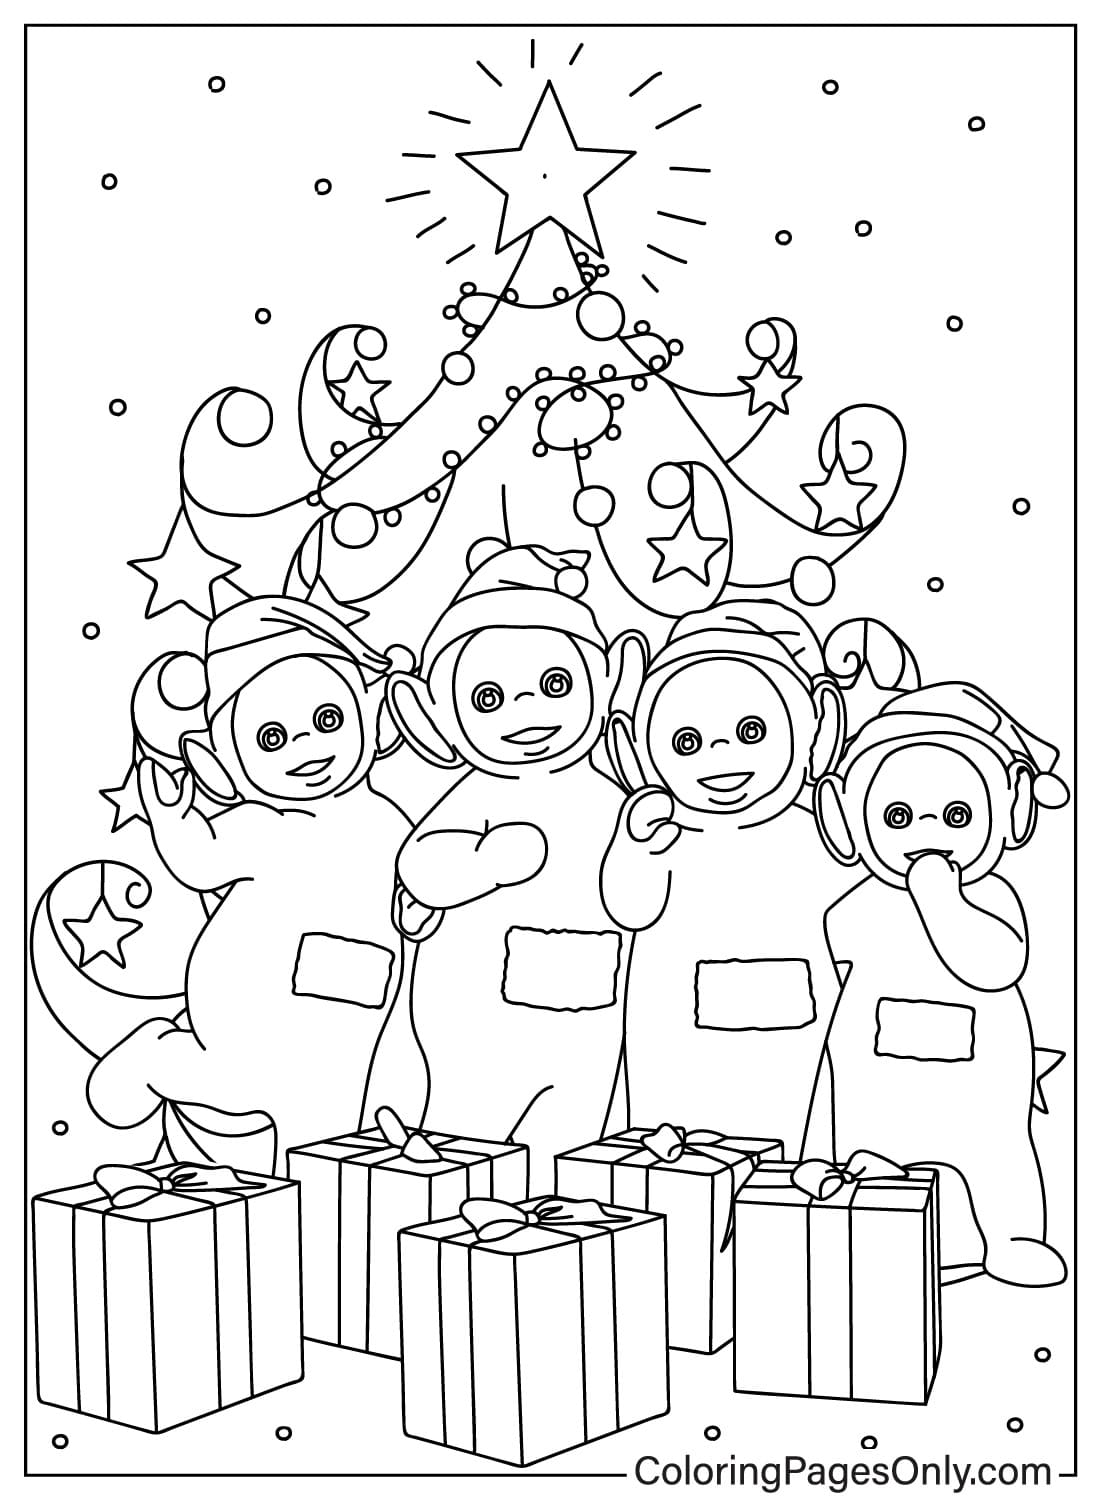 Teletubbies – WildBrain Christmas Coloring Page from Teletubbies - WildBrain